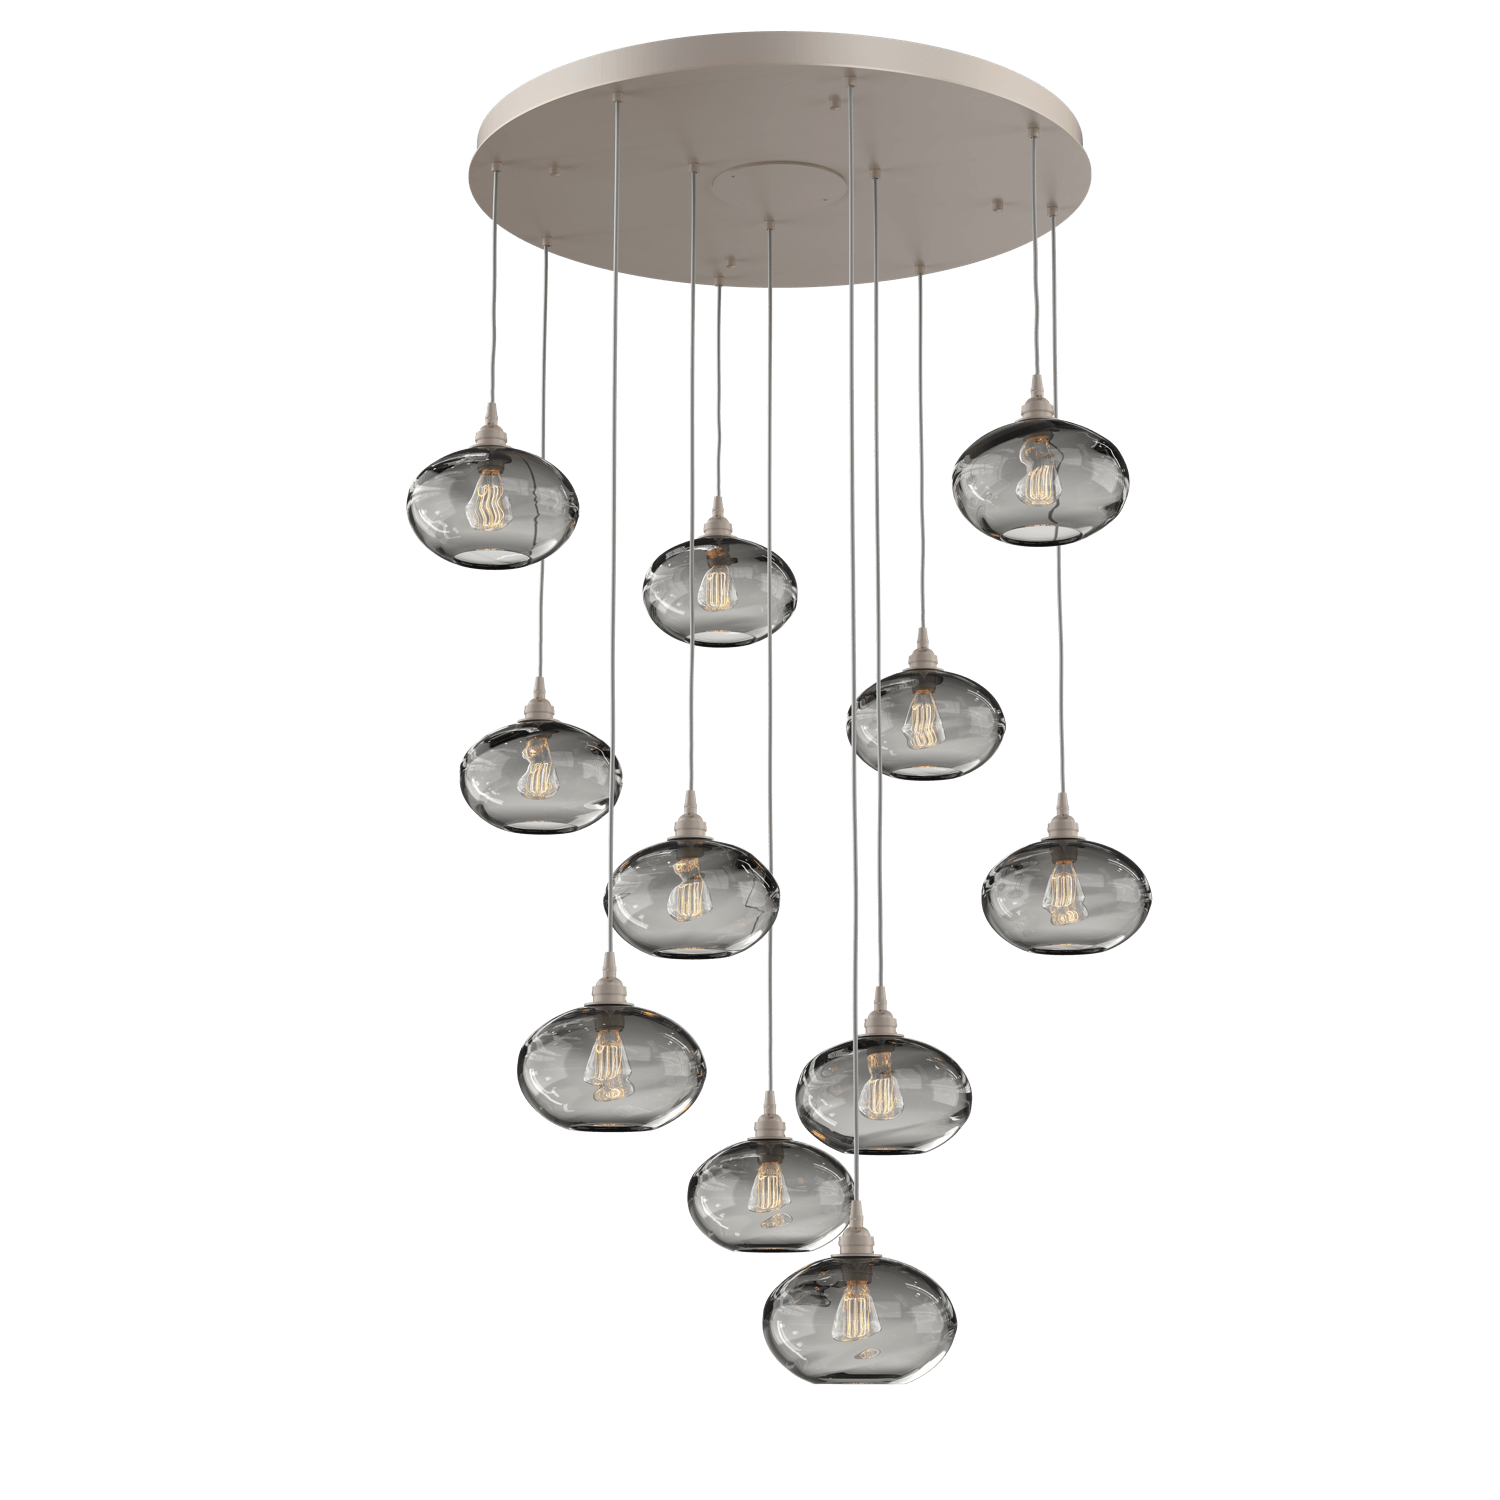 CHB0036-11-BS-OS-Hammerton-Studio-Optic-Blown-Glass-Coppa-11-light-round-pendant-chandelier-with-metallic-beige-silver-finish-and-optic-smoke-blown-glass-shades-and-incandescent-lamping